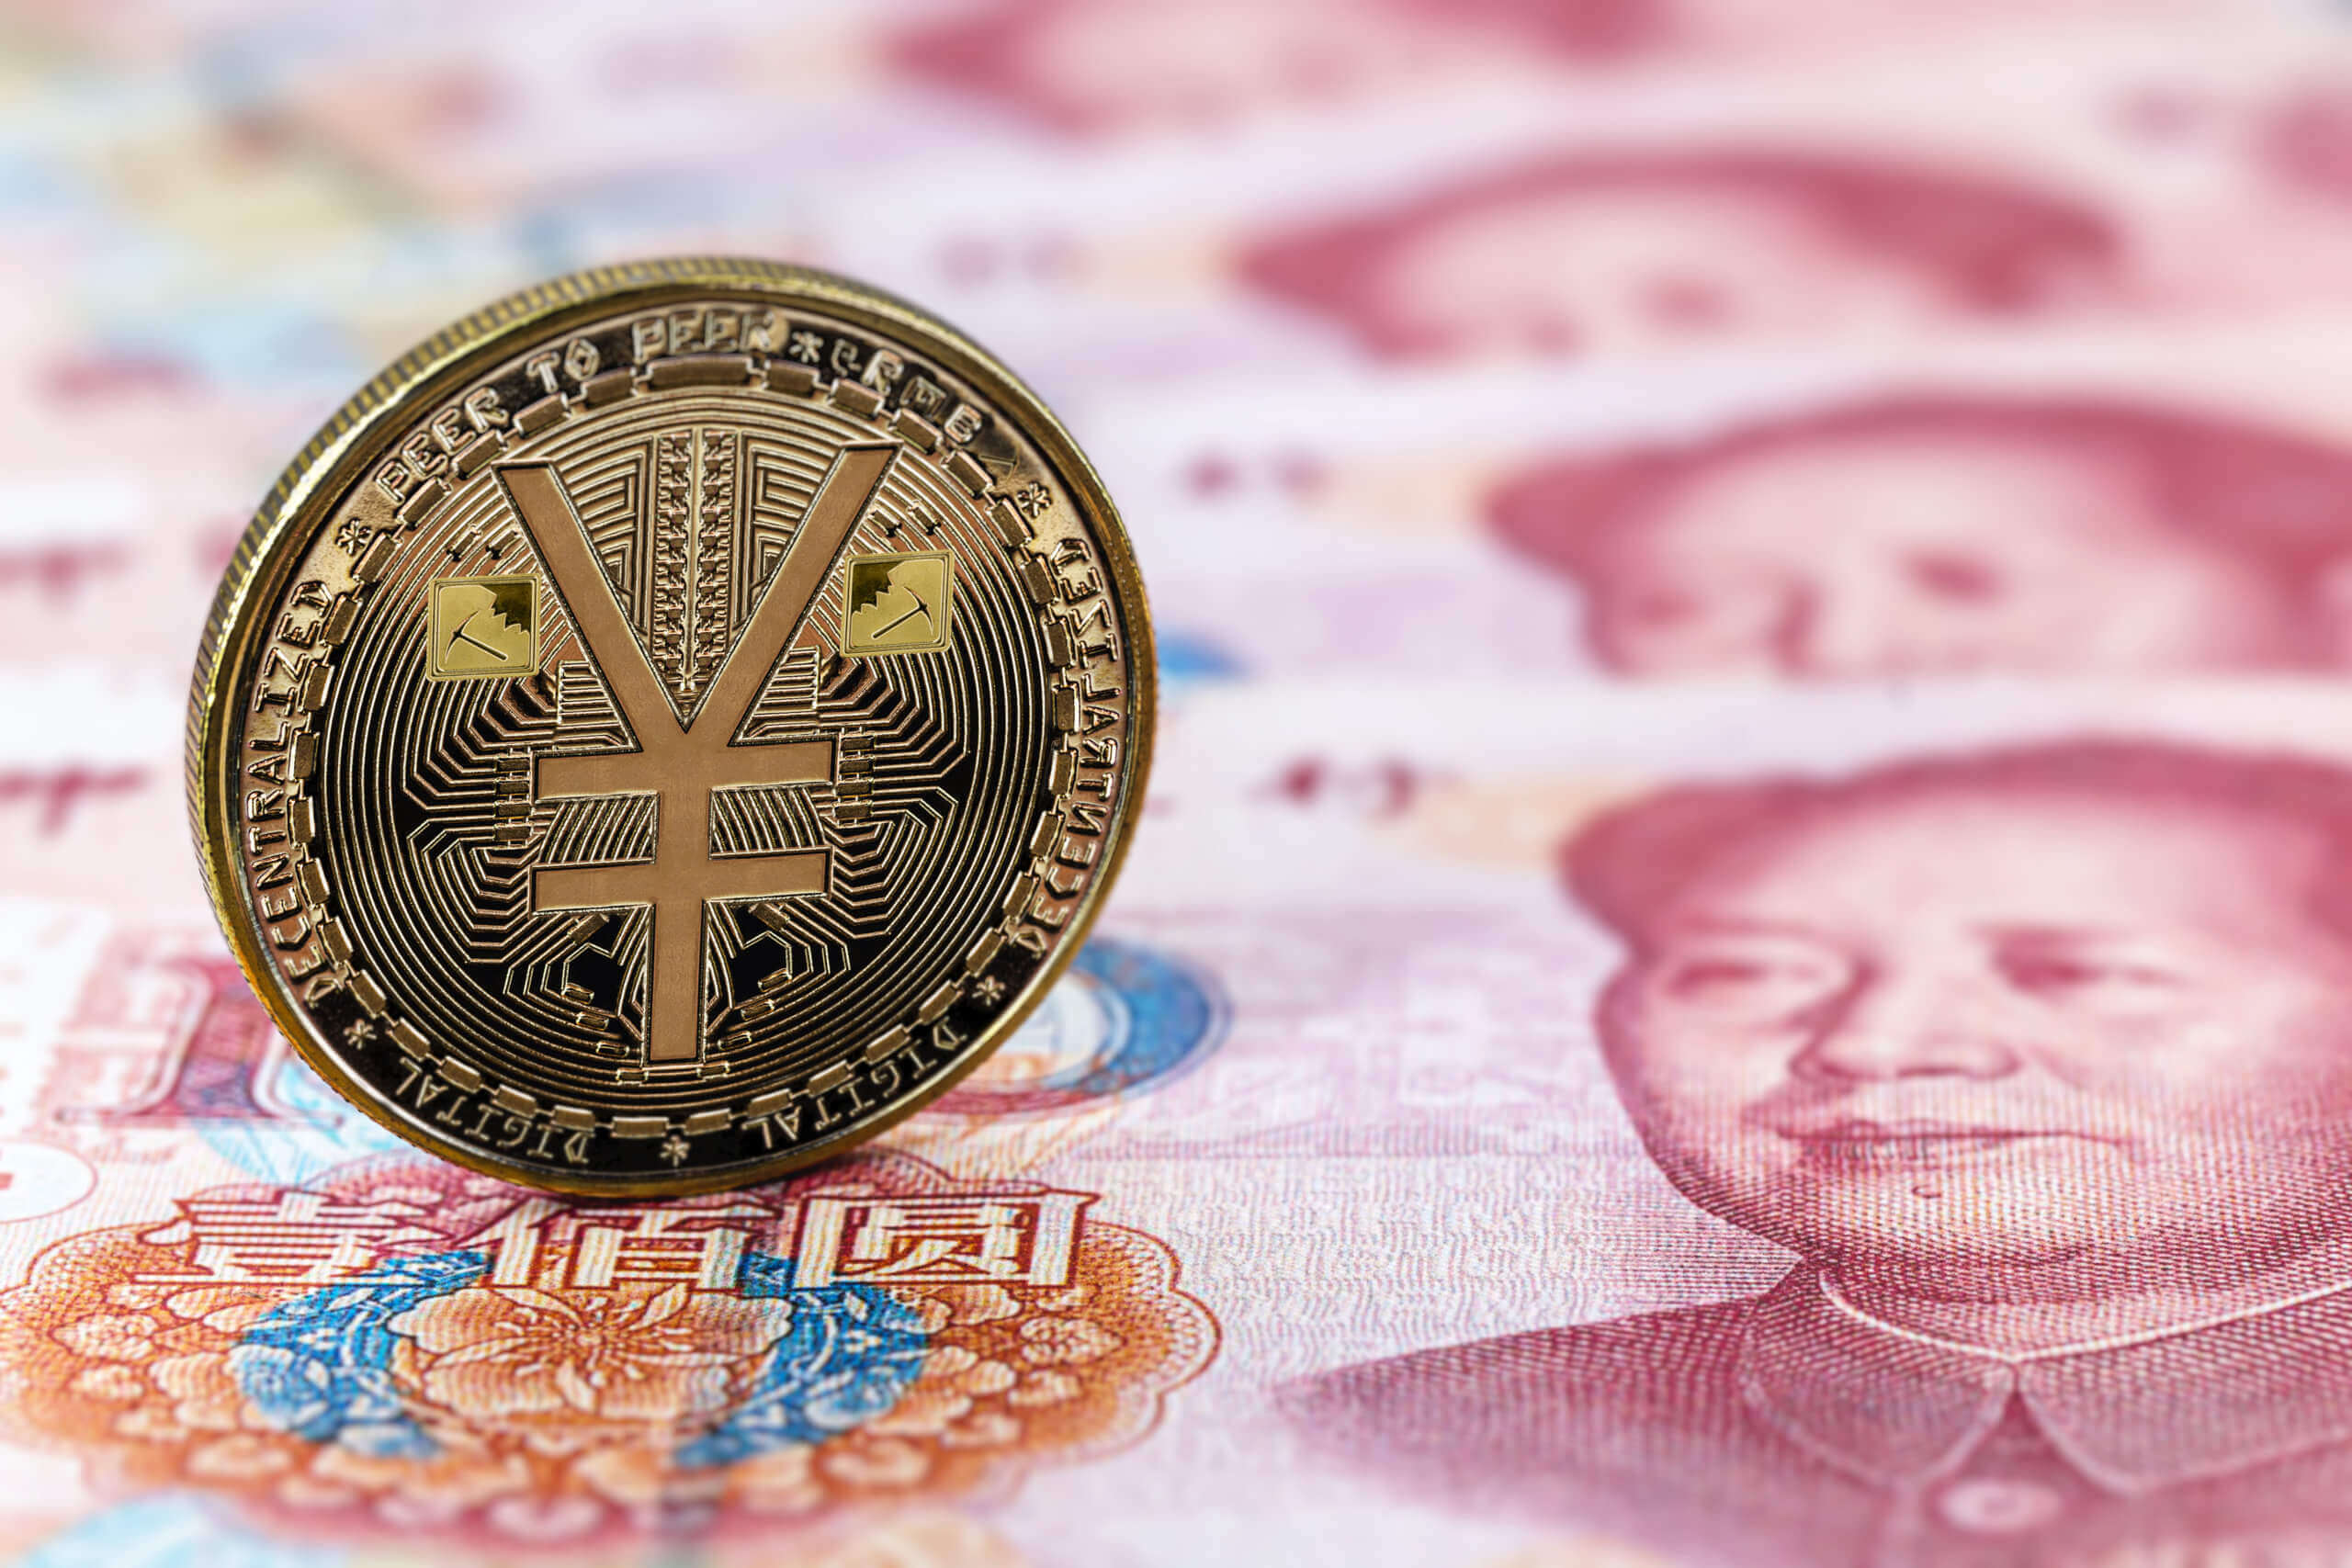 The Digital yuan is posing challenges to the U.S. dollar